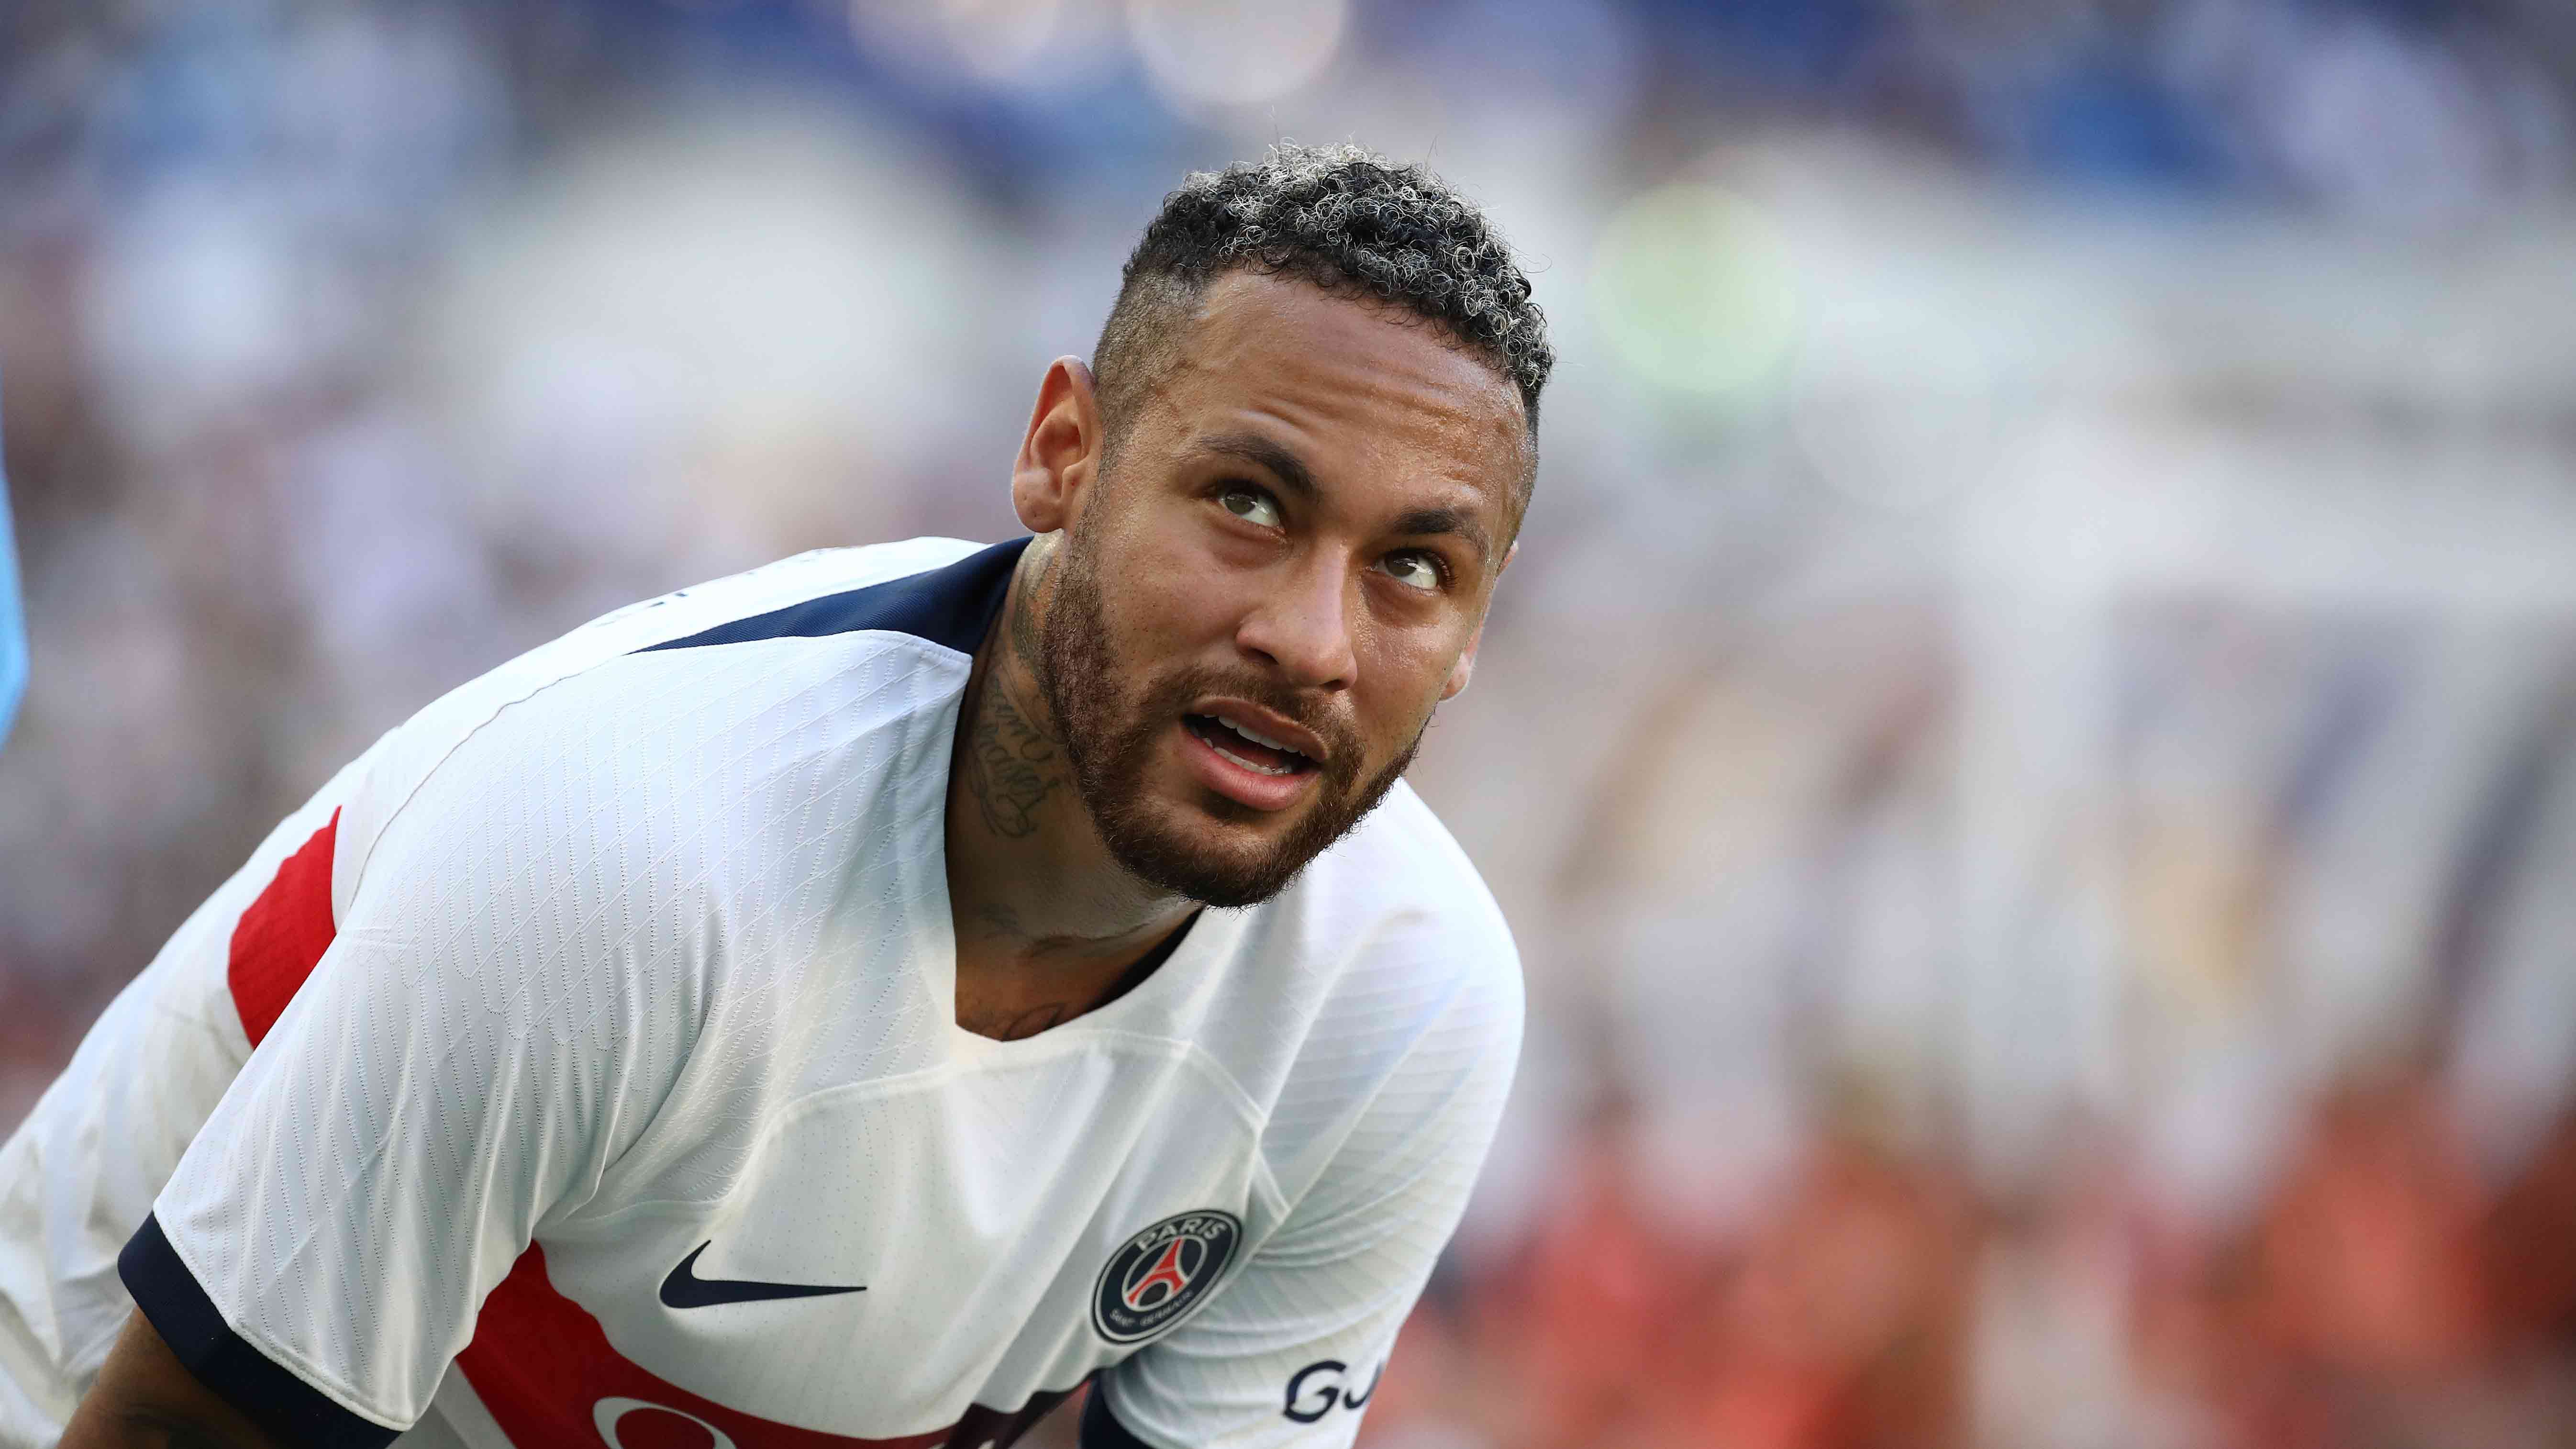 Neymar to join Al Hilal in Saudi league after PSG transfer, per report